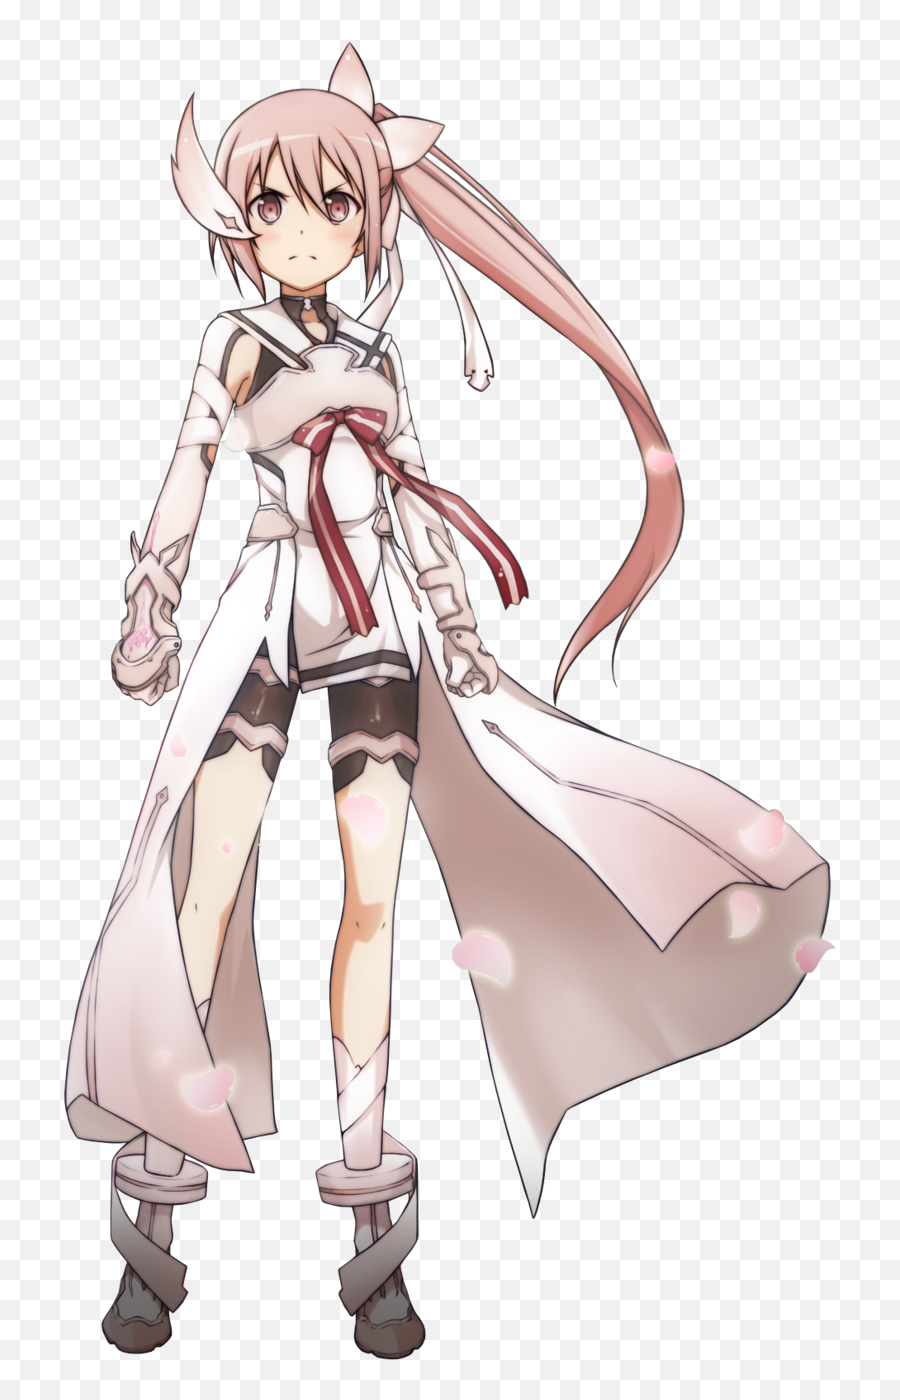 City Of Lost Characters Crossover Rp Signup - Tv Tropes Forum Yuki Yuna Is A Hero Transparent Emoji,Yuna Songstress Emotion